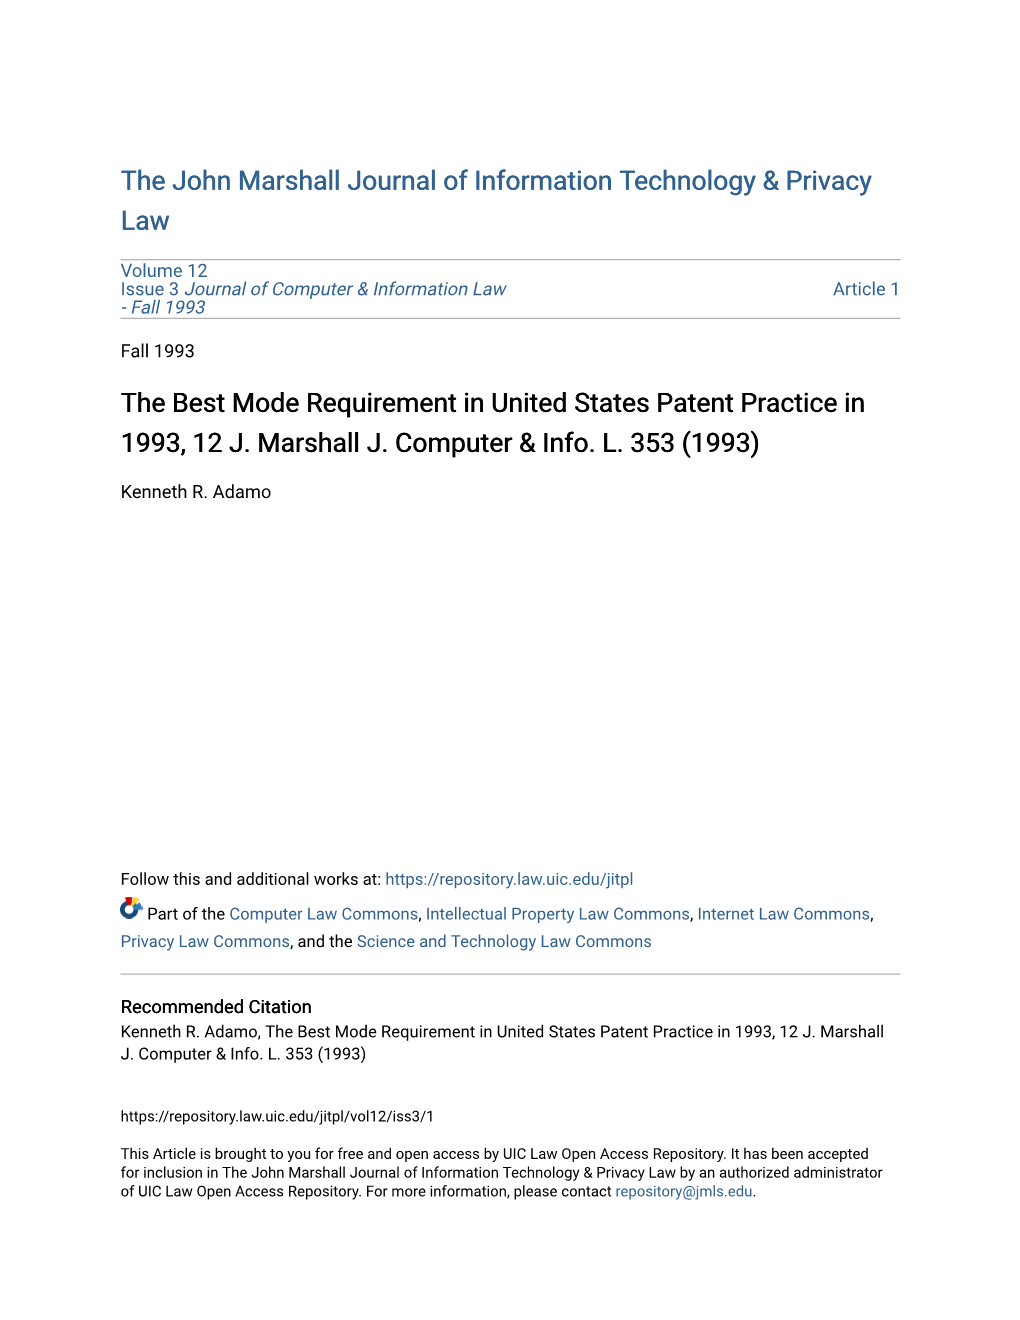 The Best Mode Requirement in United States Patent Practice in 1993, 12 J